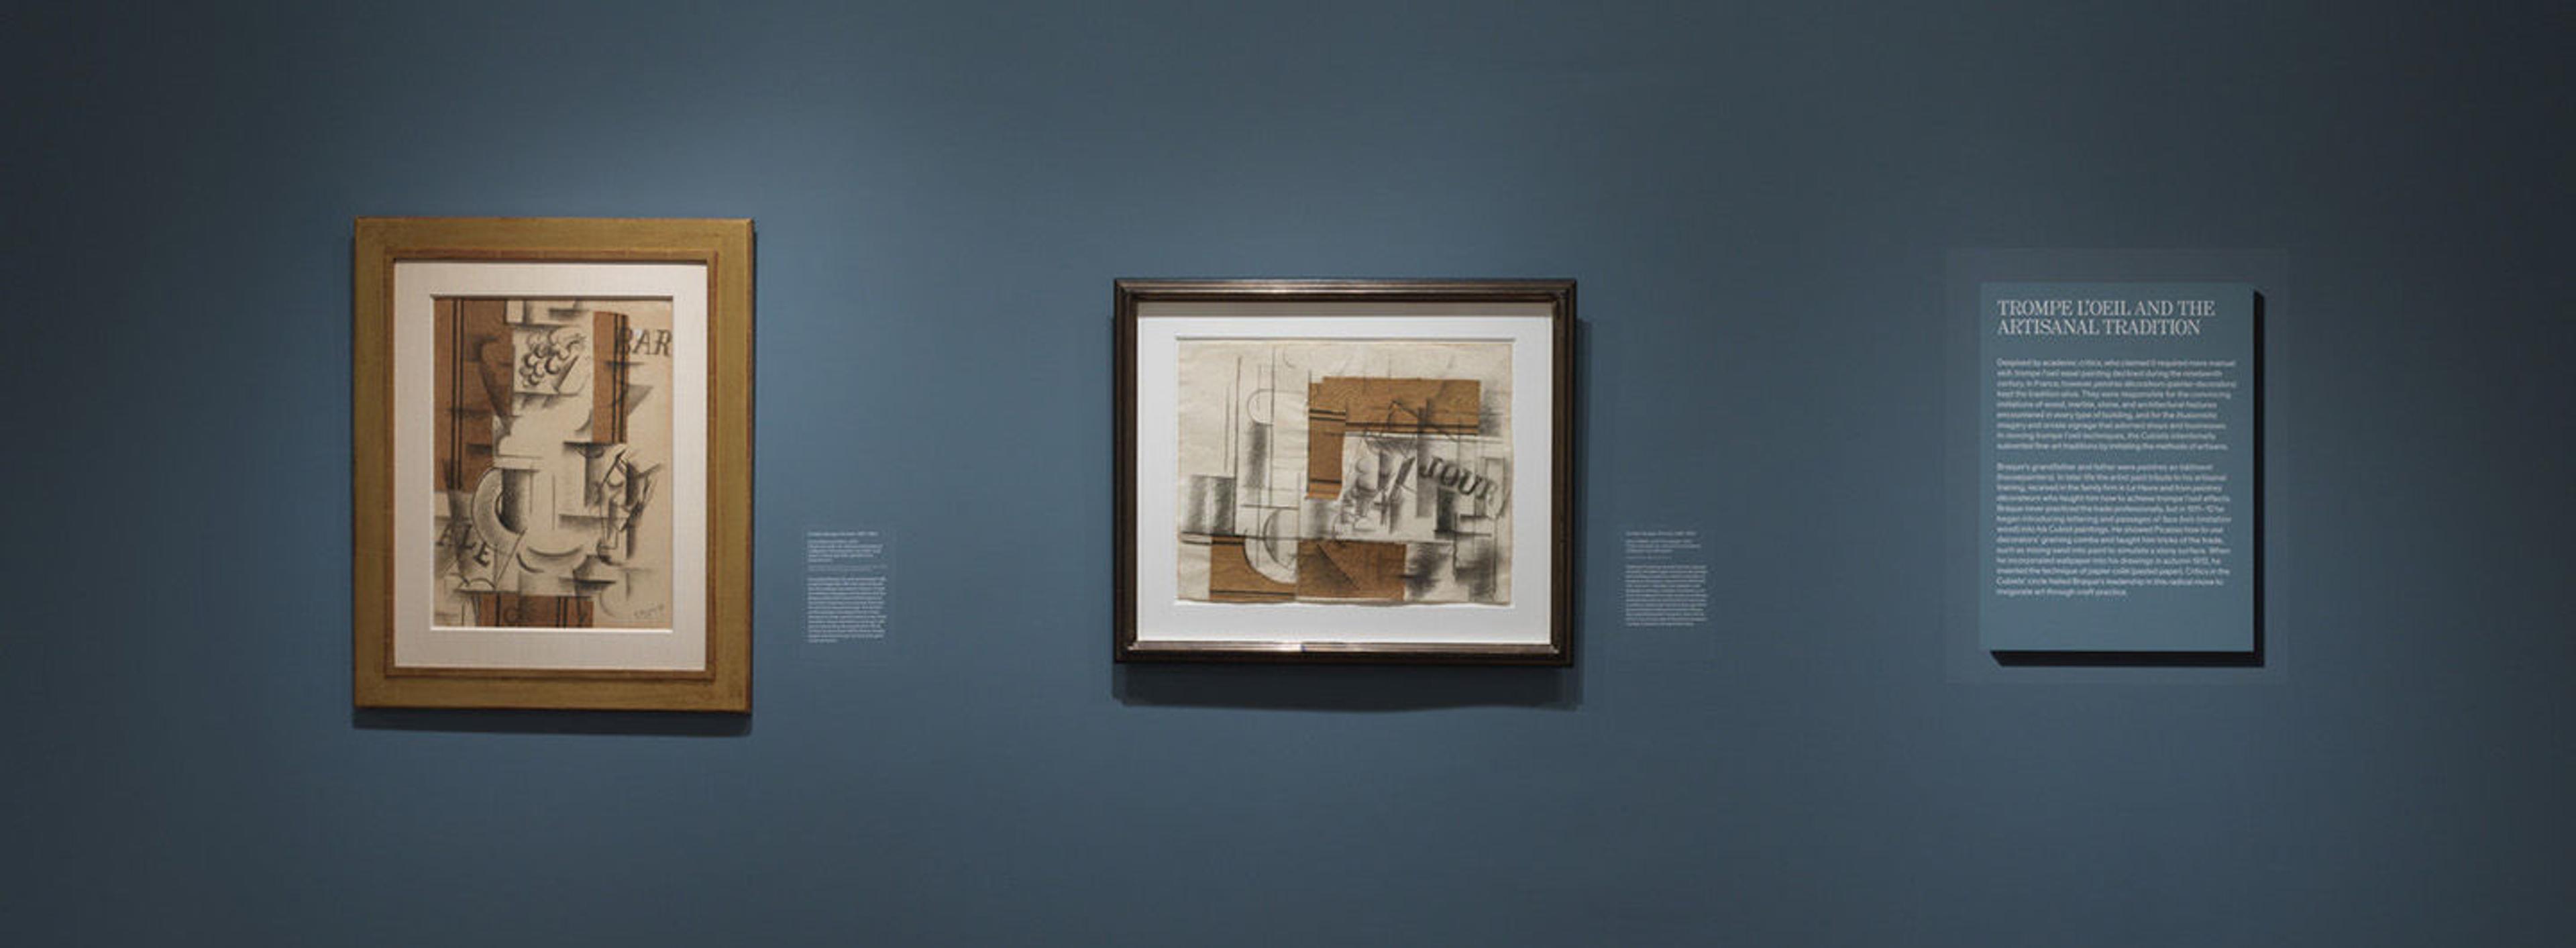 Cubism and the Trompe l'Oeil Tradition - The Metropolitan Museum